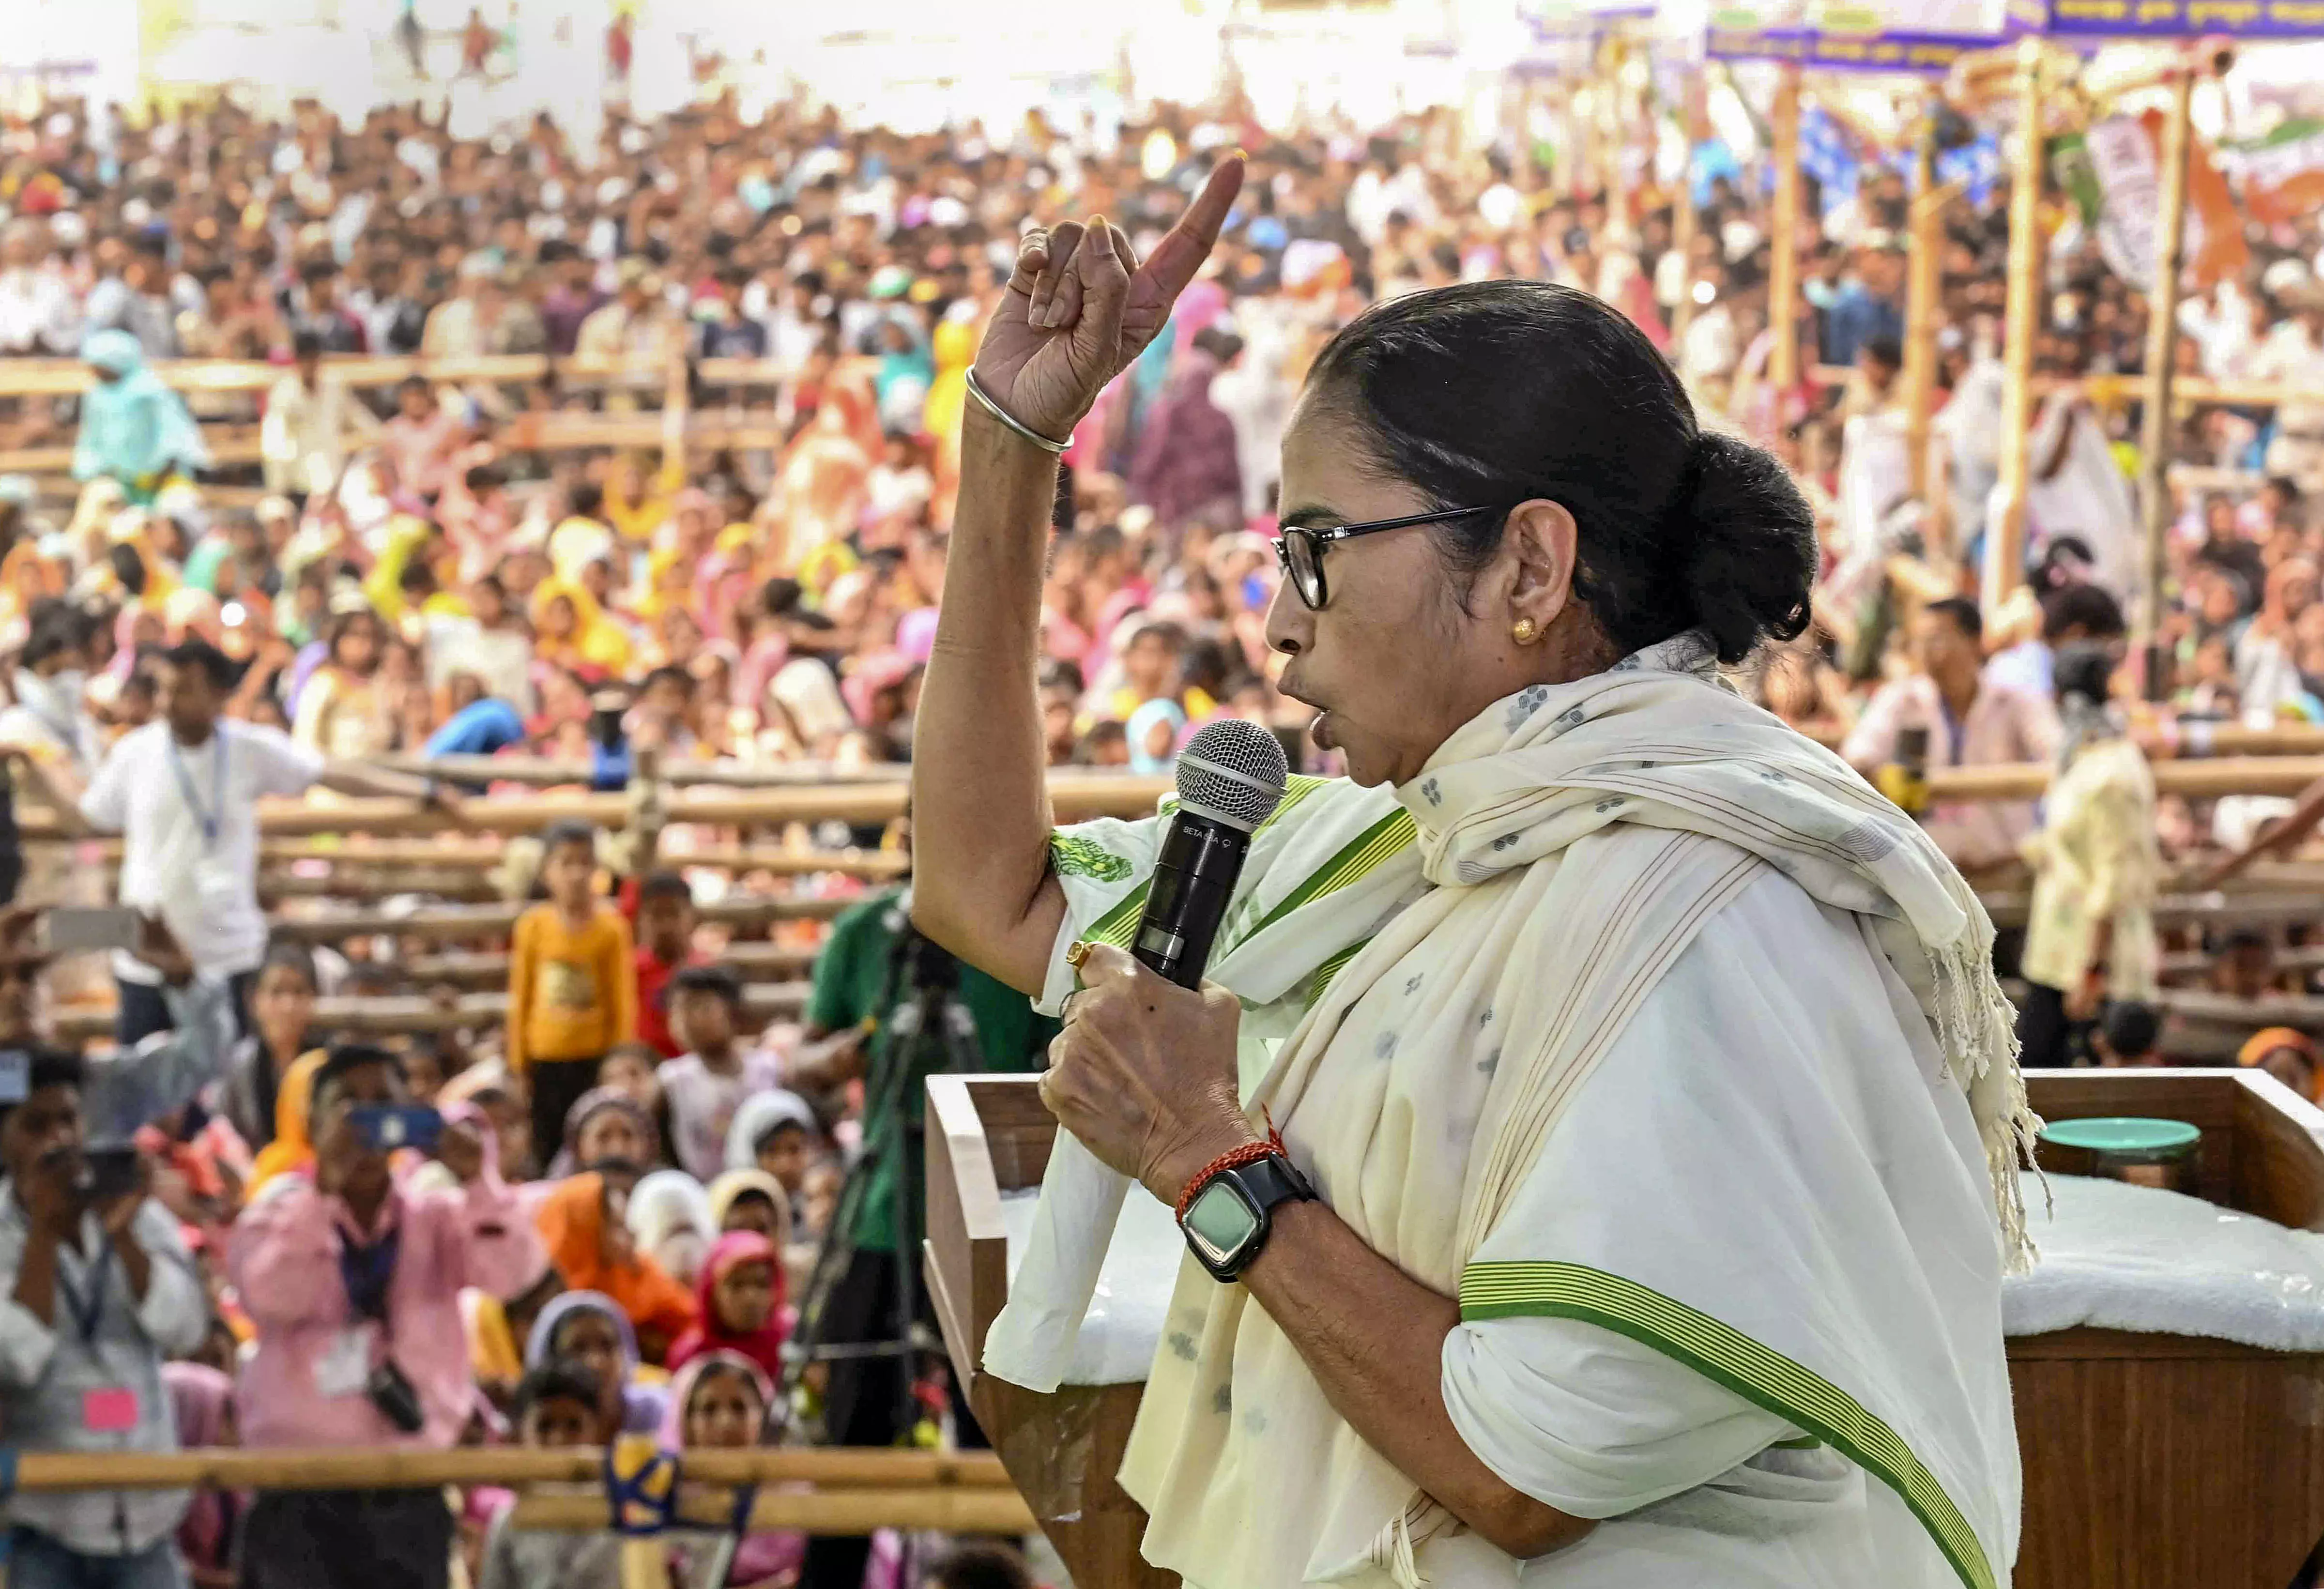 Mamata raises concern over sudden rise in voter turnout, questions EVM credibility